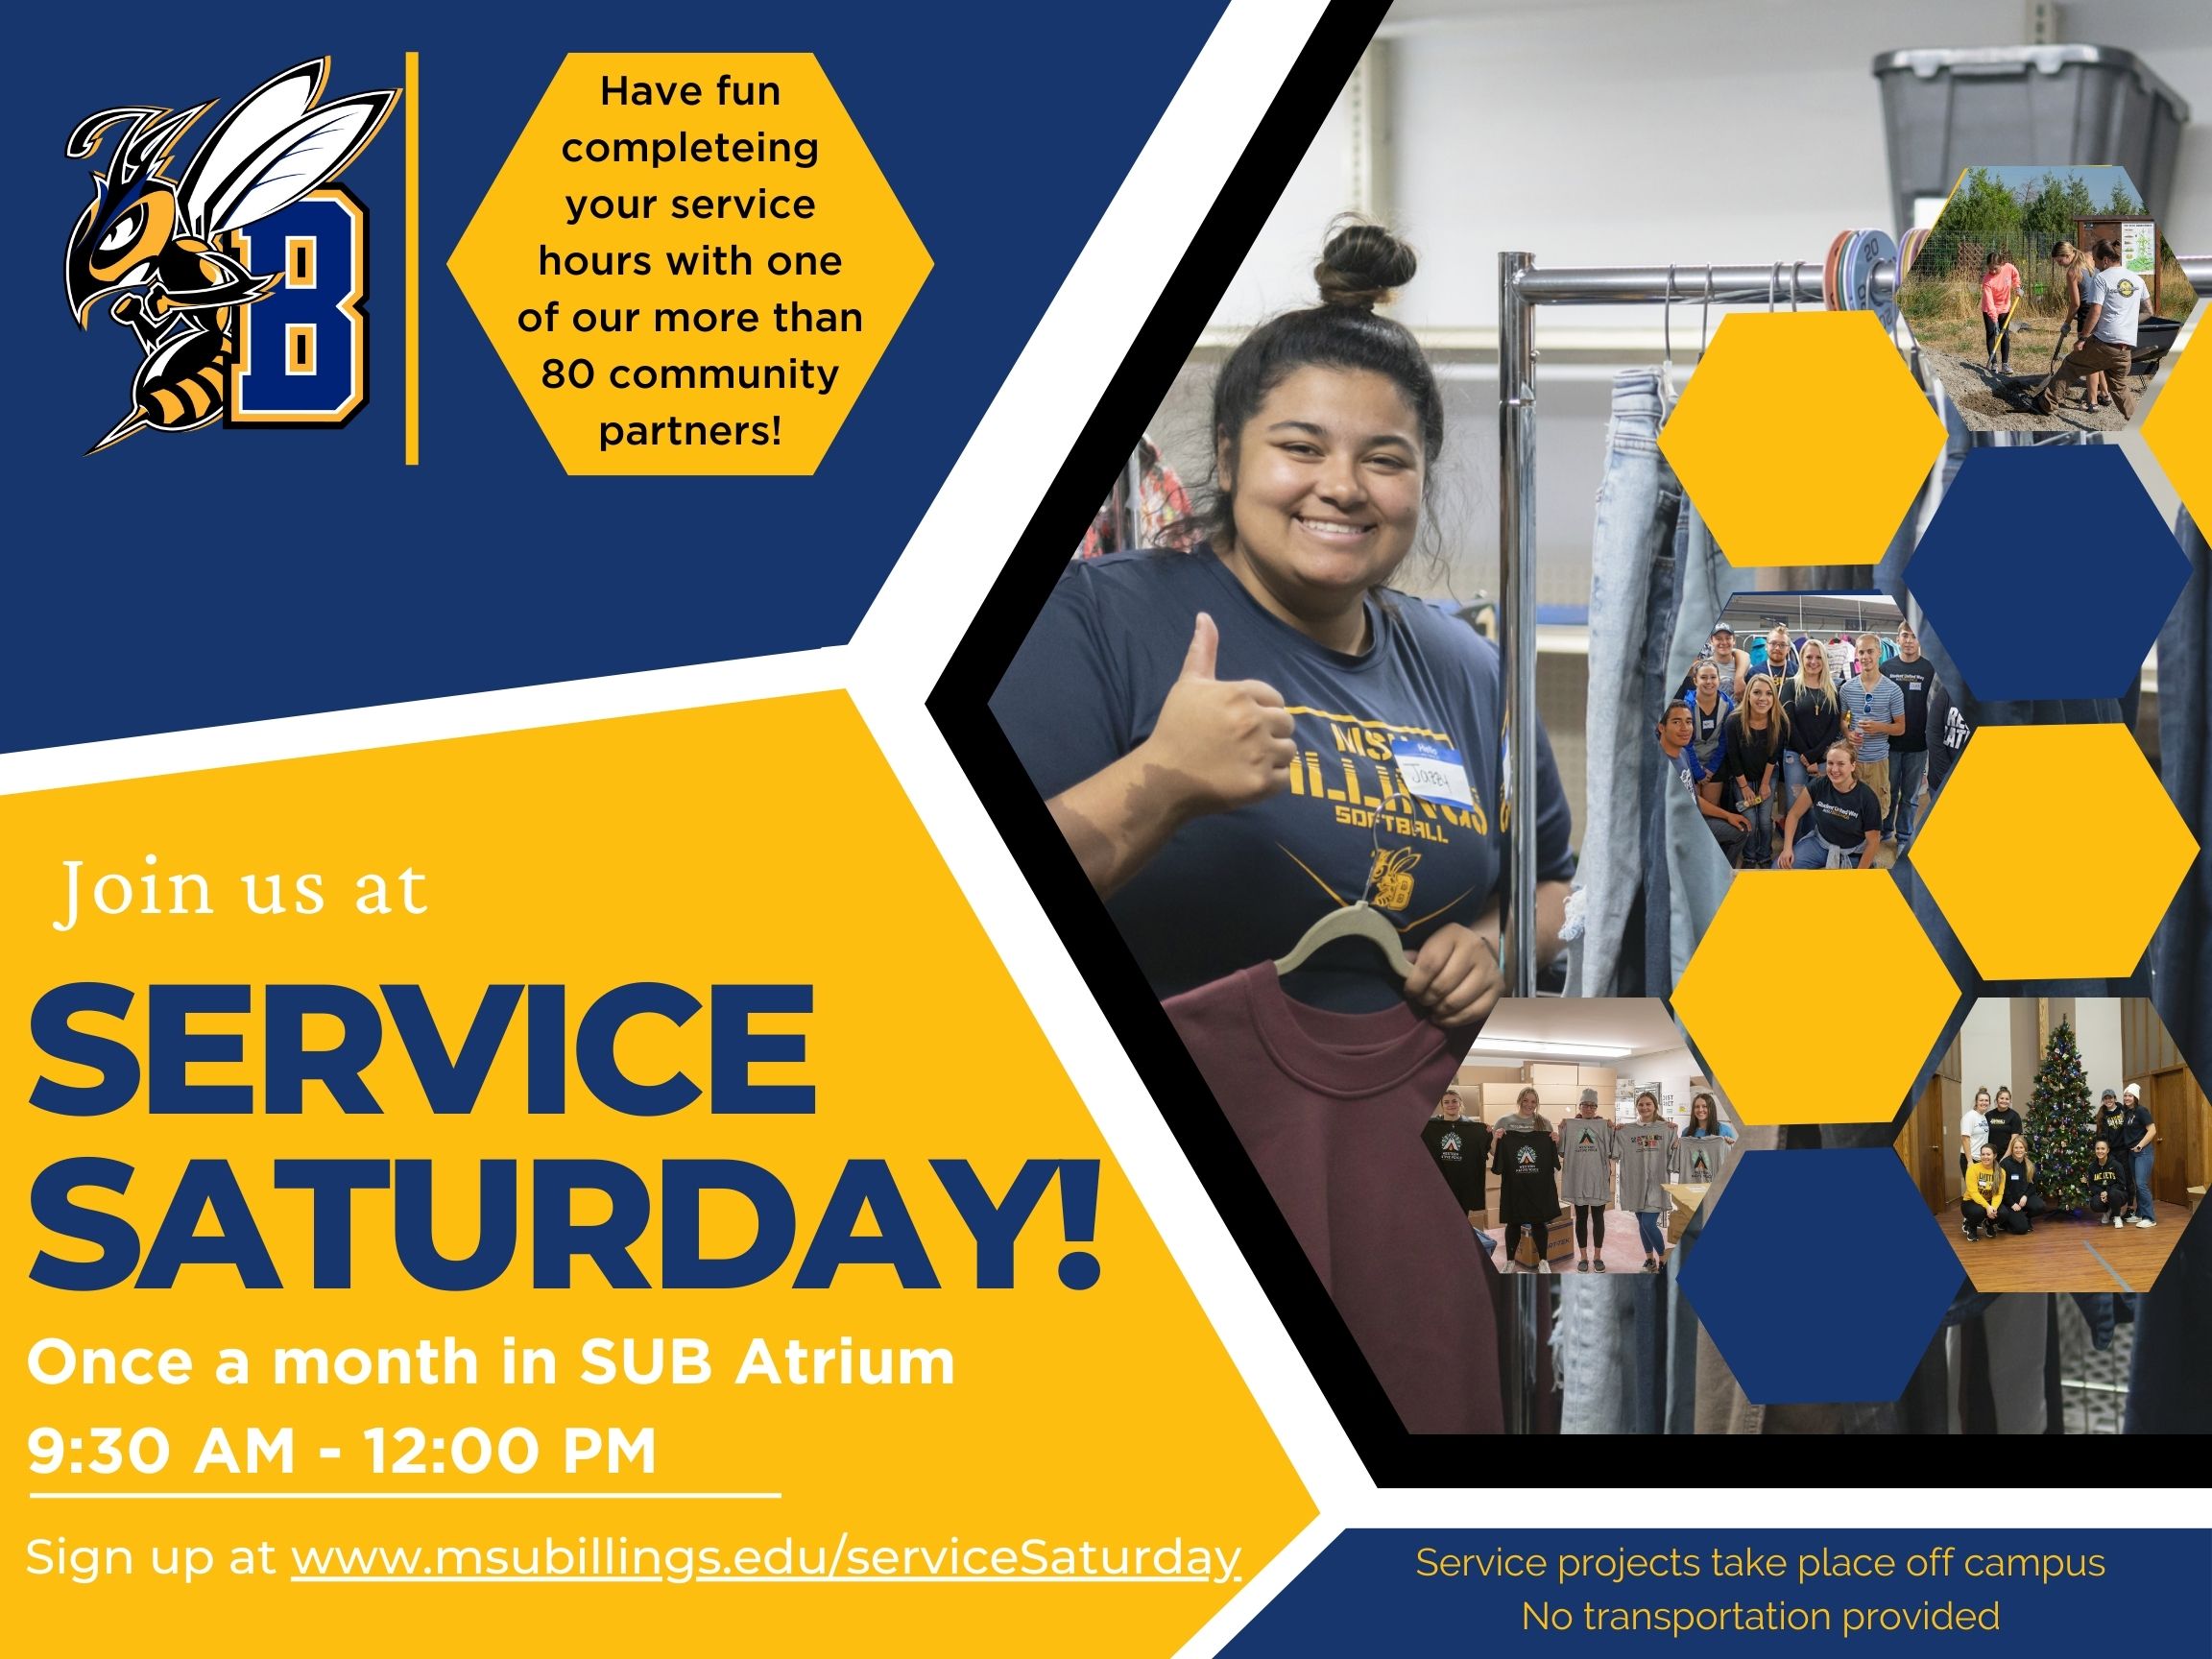 Join us at Service Saturday. Once a month in SUB Atrium 9:30 12:00. Com plete your service hours with one of our more than 80 community partners